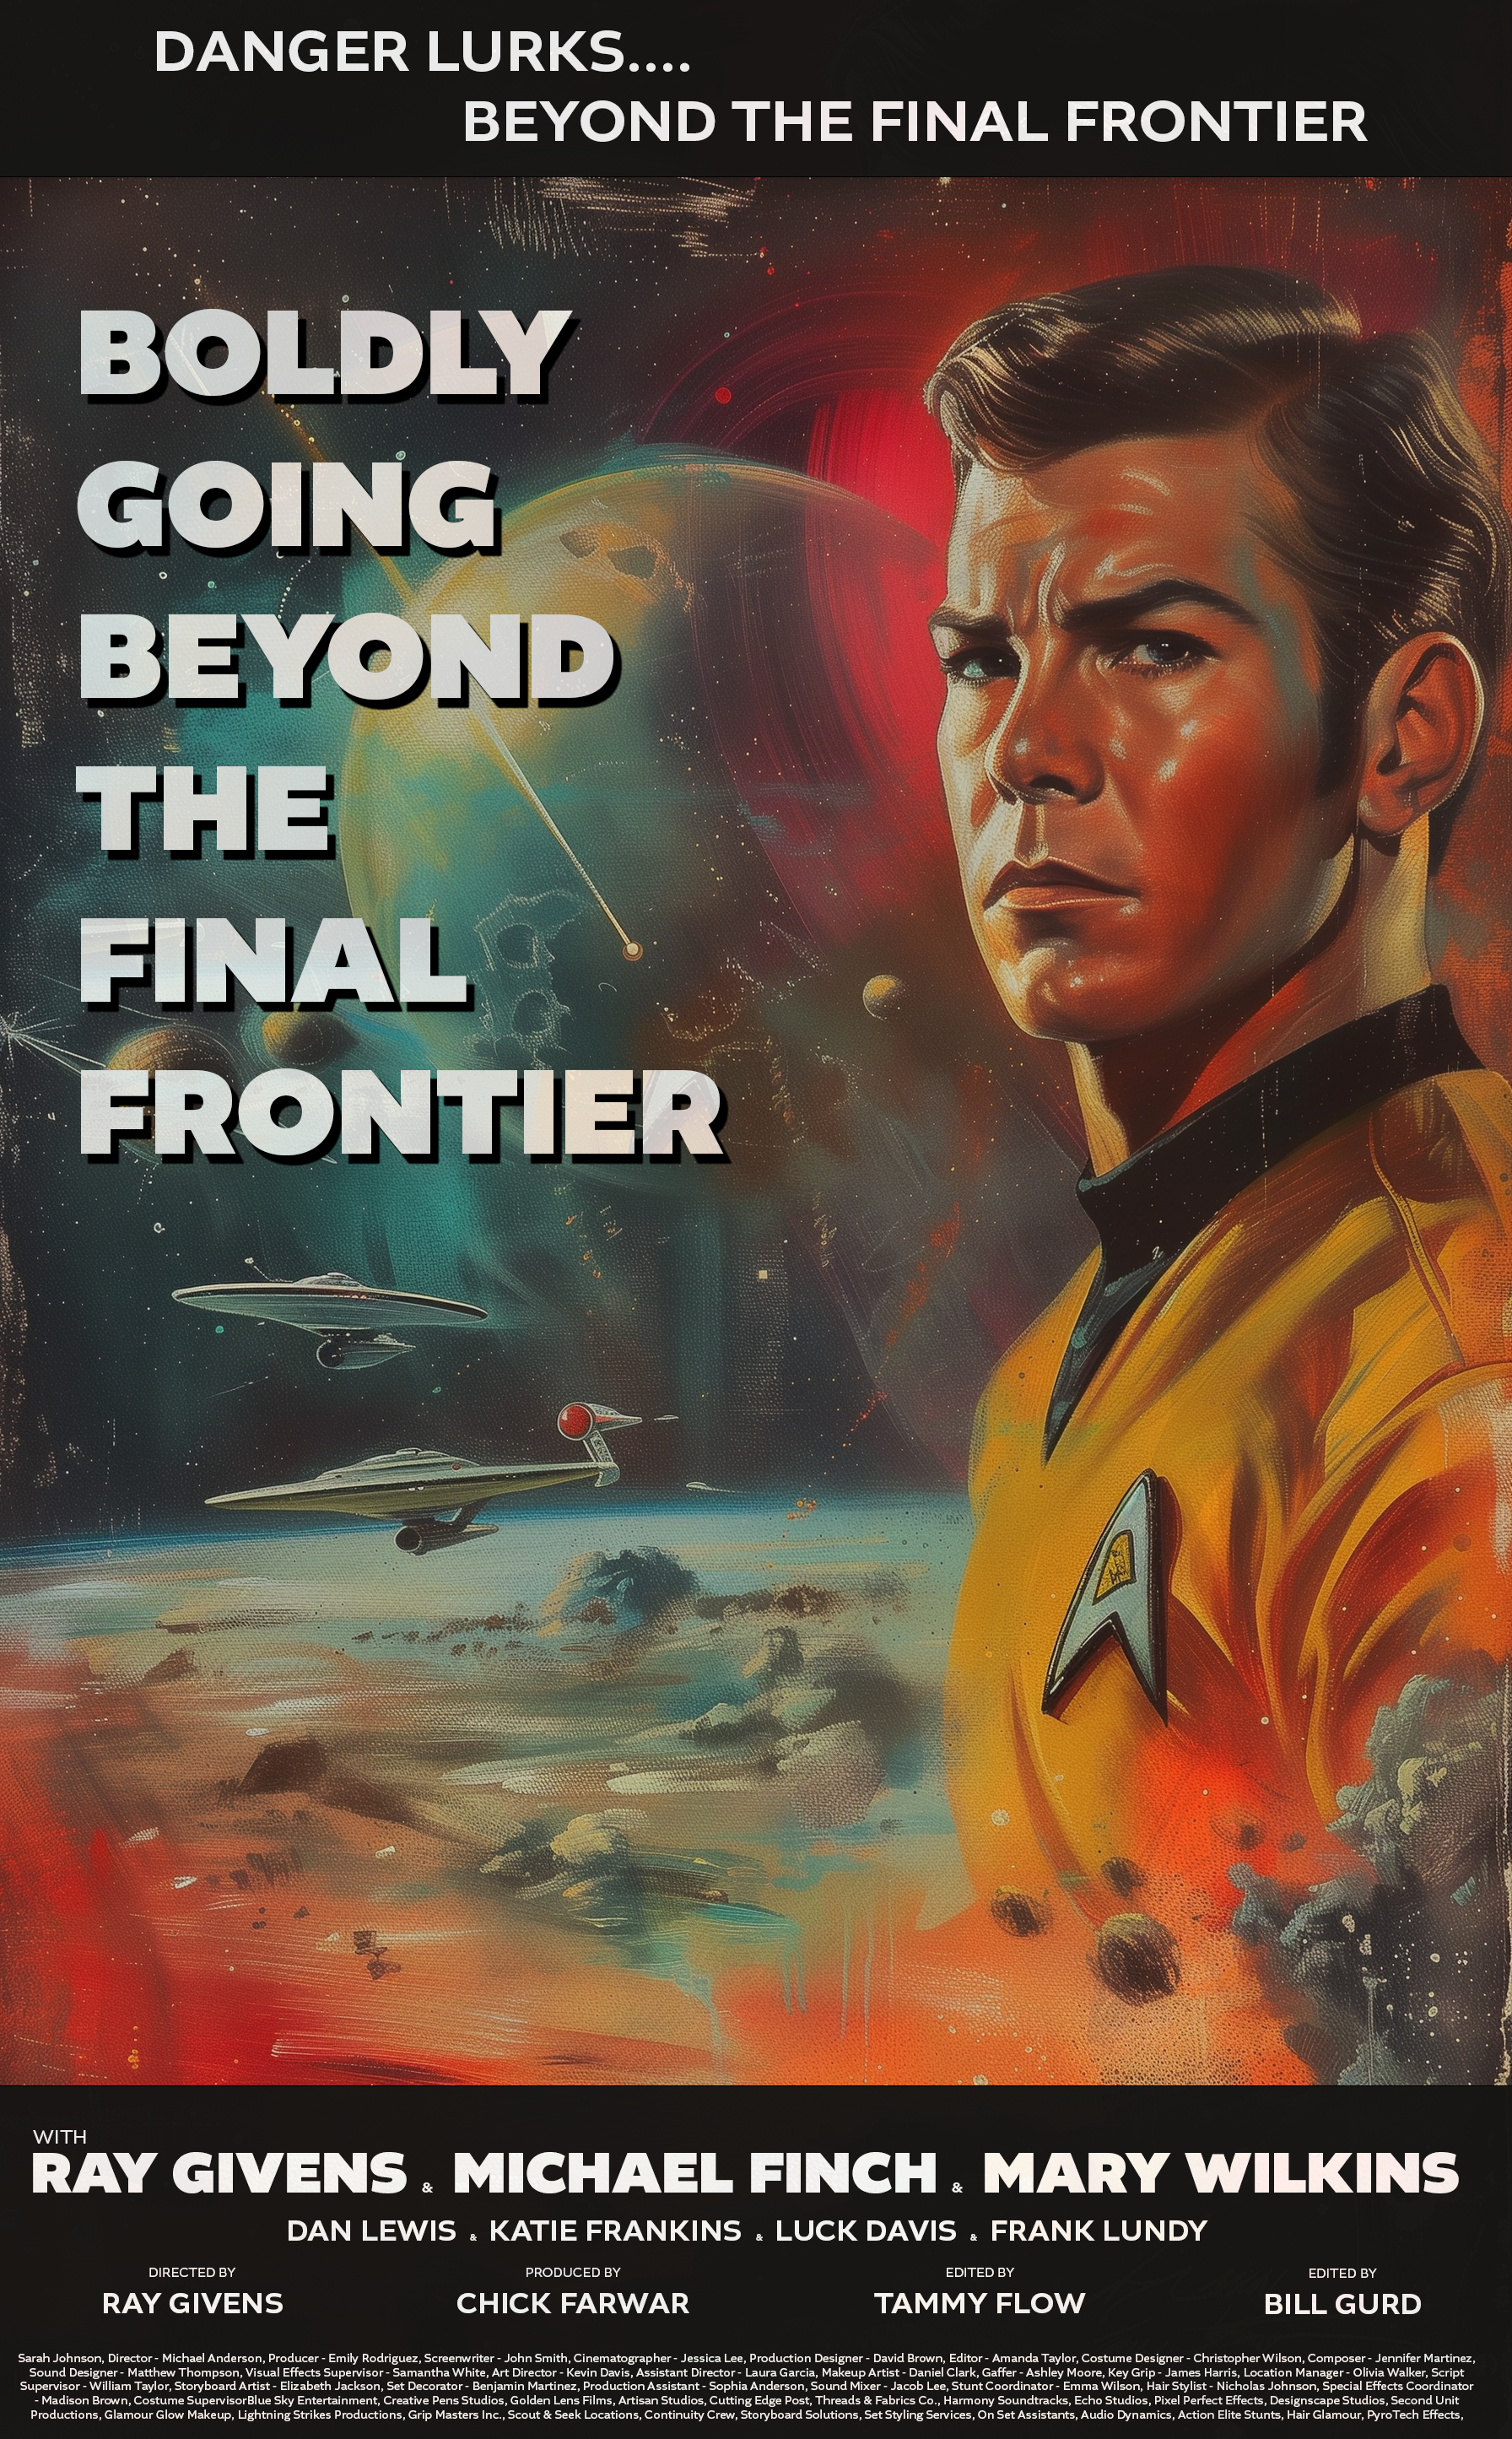 Name:  Beyond the Final Frontier.png
Views: 151
Size:  8.19 MB